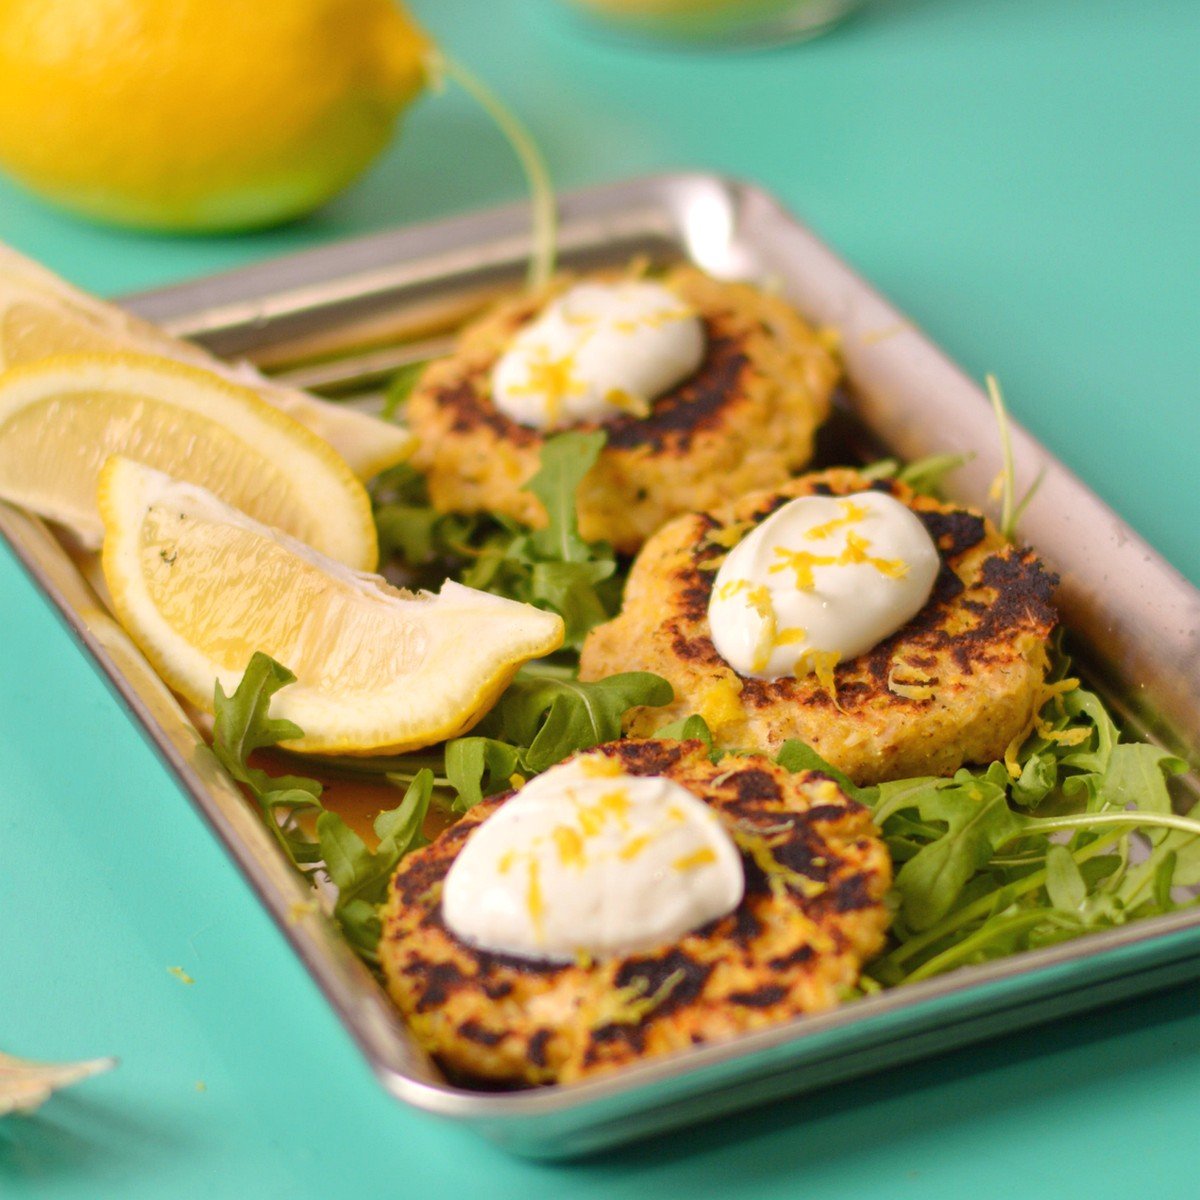 salmon patties on a tray with white sauce and lemons.